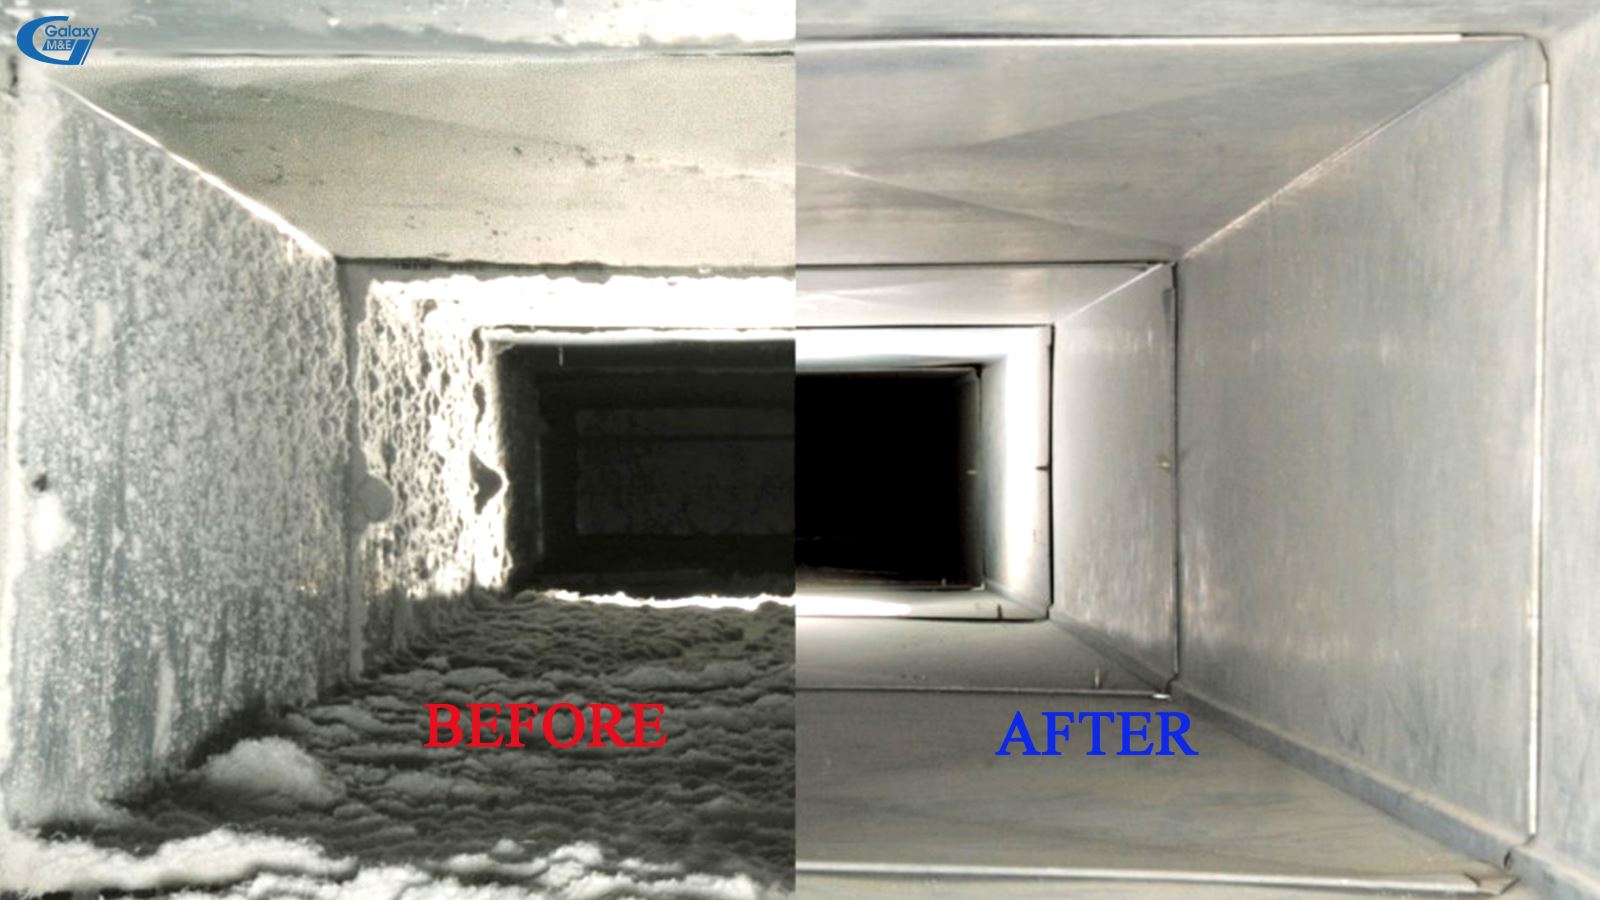 Regular maintenance and cleaning of the ventilation system is a way to increase the performance of the pressurized fan.